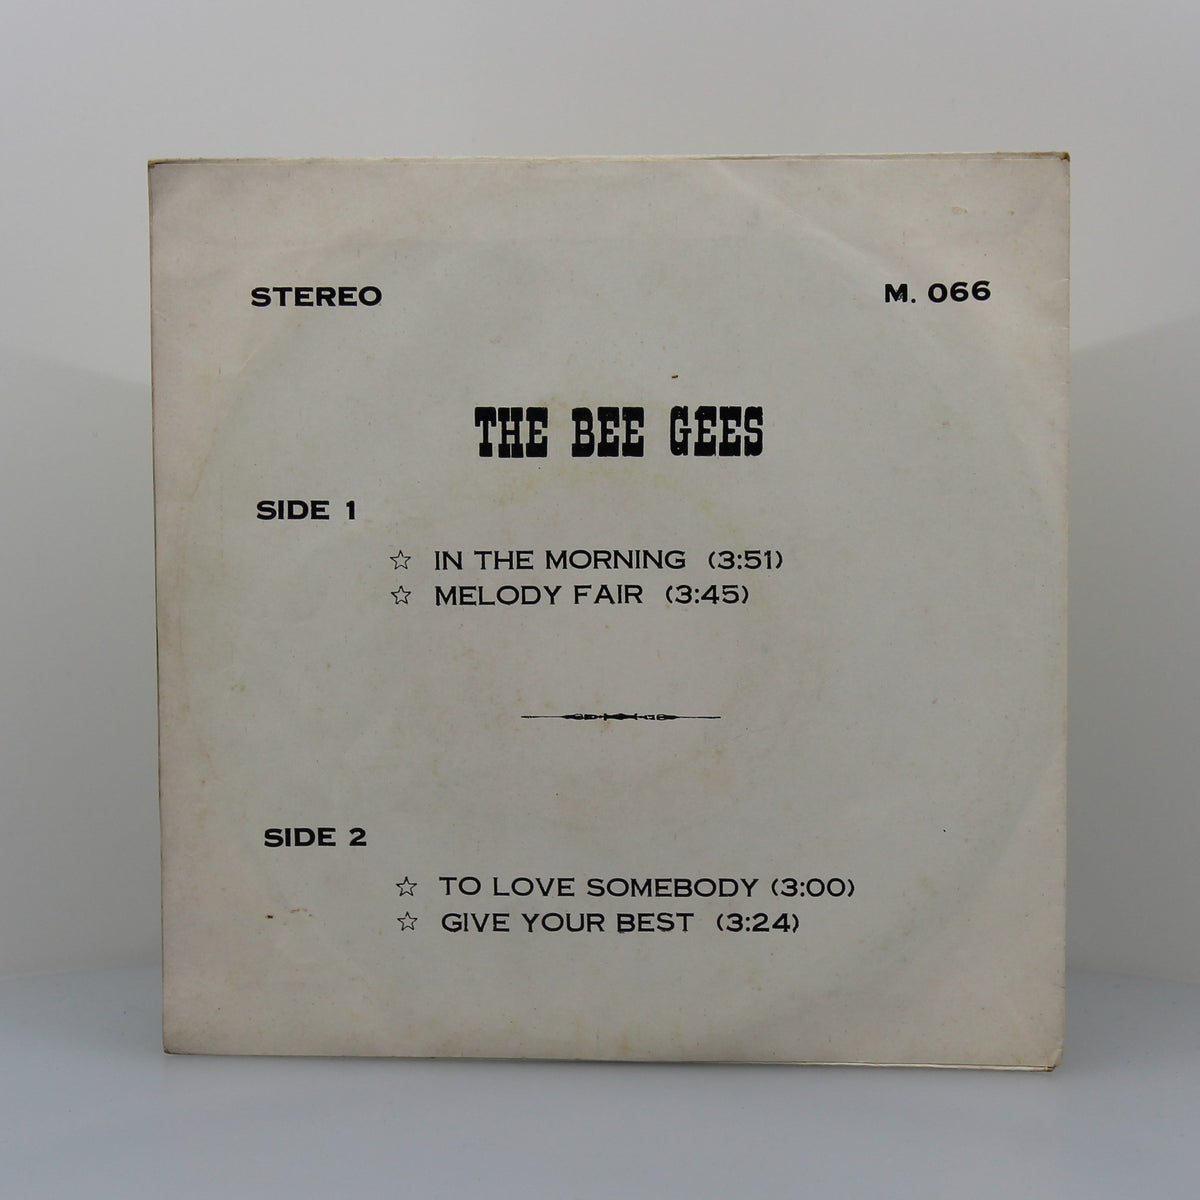 Bee Gees - Love Melody, Vinyl, 7&quot;, 45 RPM, EP, Stereo, Thailand